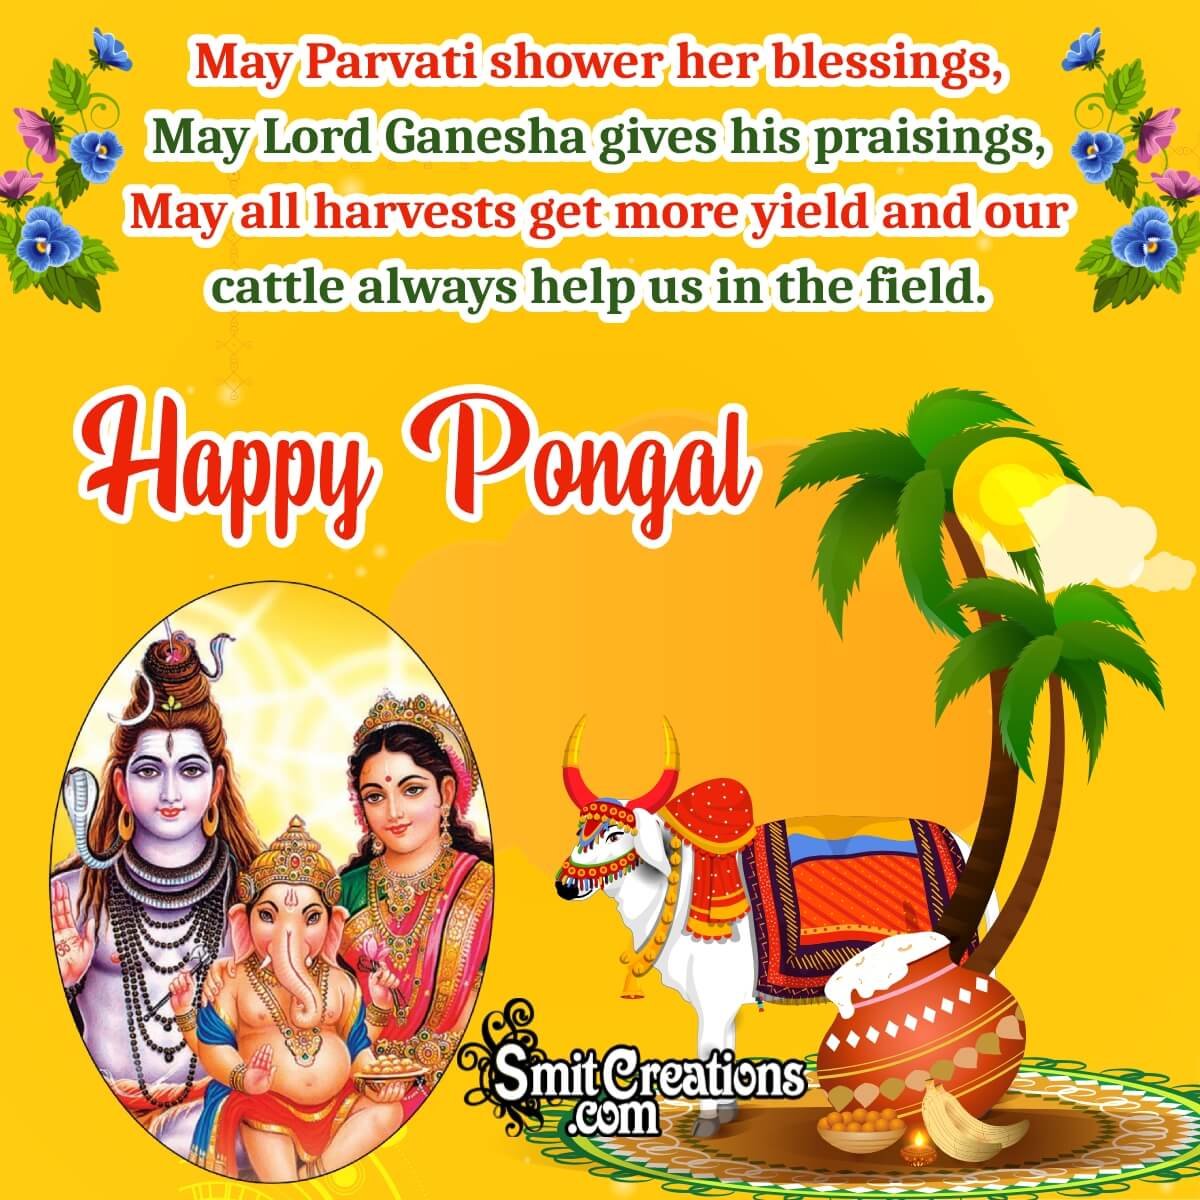 Happy Pongal Blessings Image